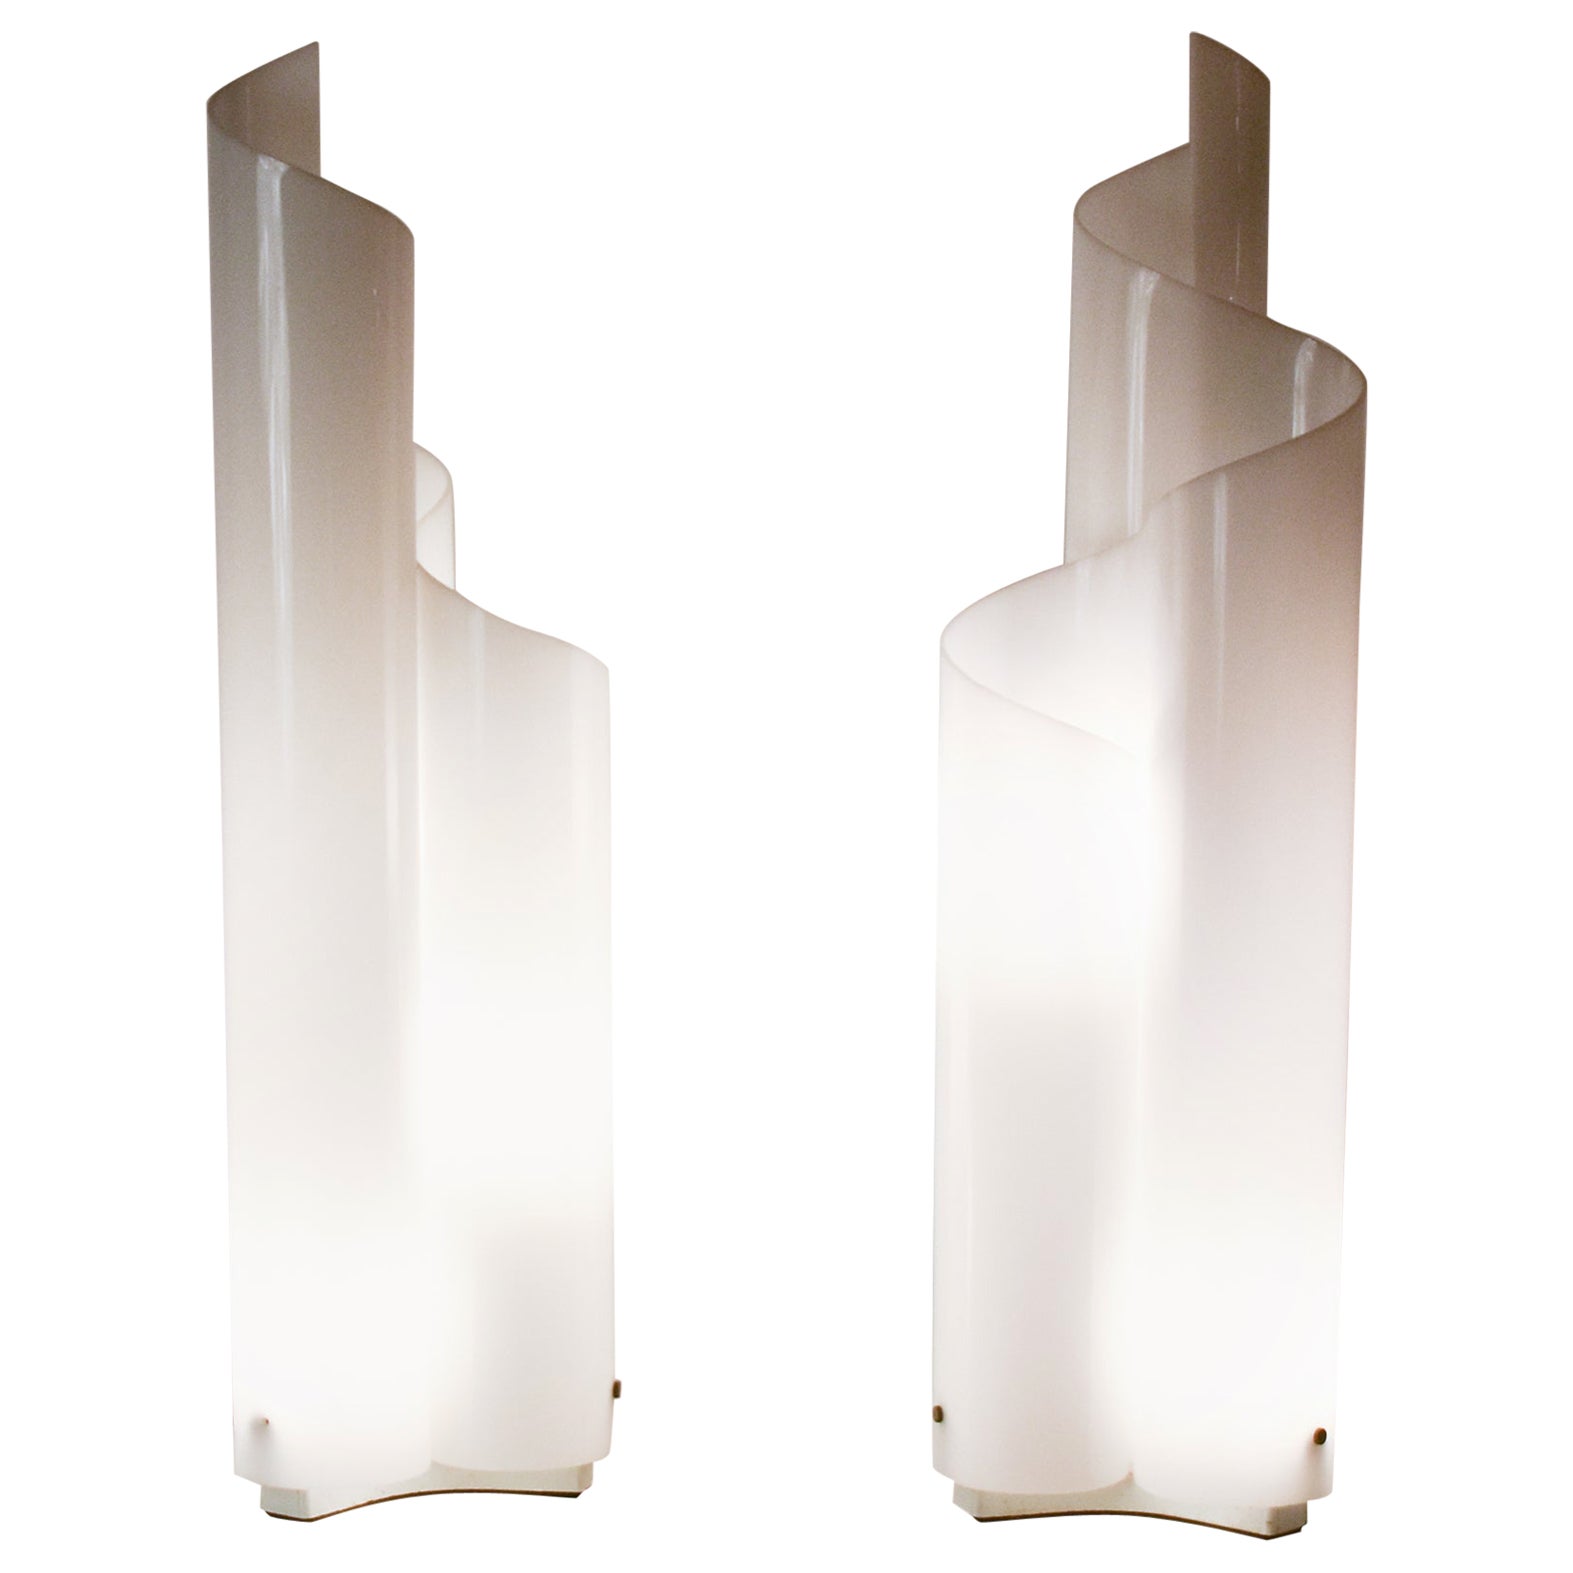  Pair of Mezzachimera Table Lamps by Vico Magistretti for Artemide, 1969 For Sale